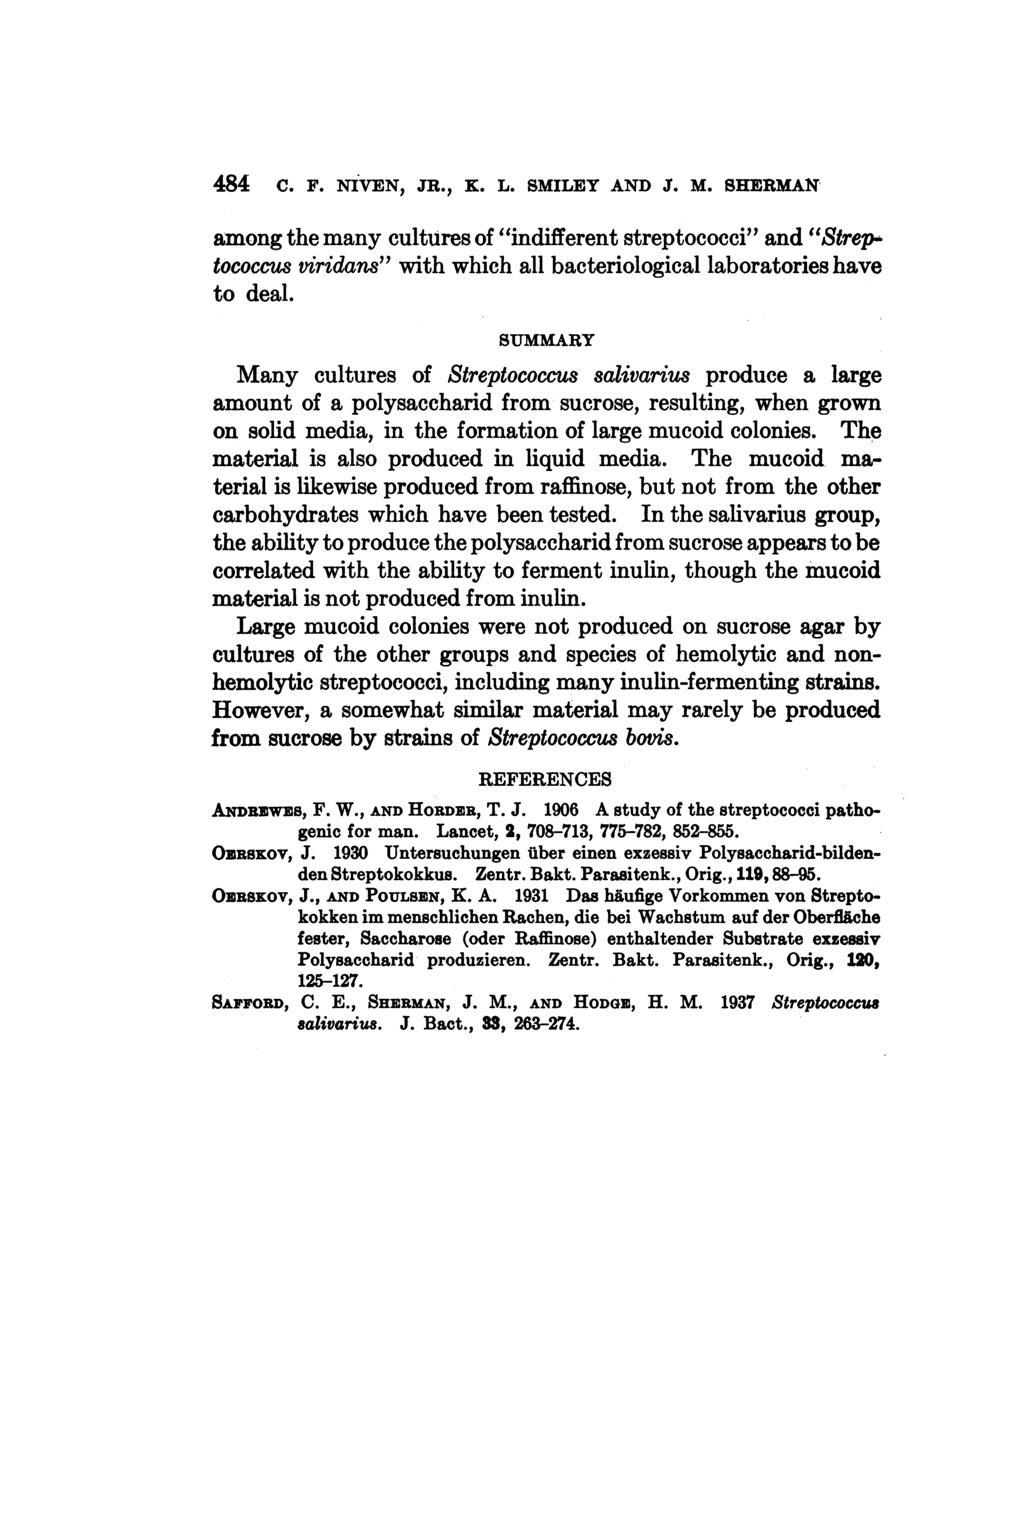 484 C. F. NIVEN, JR., K. L. SMILEY AND J. M. SHERMAN among the many cultures of "indifferent streptococci" and "Streptococcus viridans" with which all bacteriological laboratories have to deal.